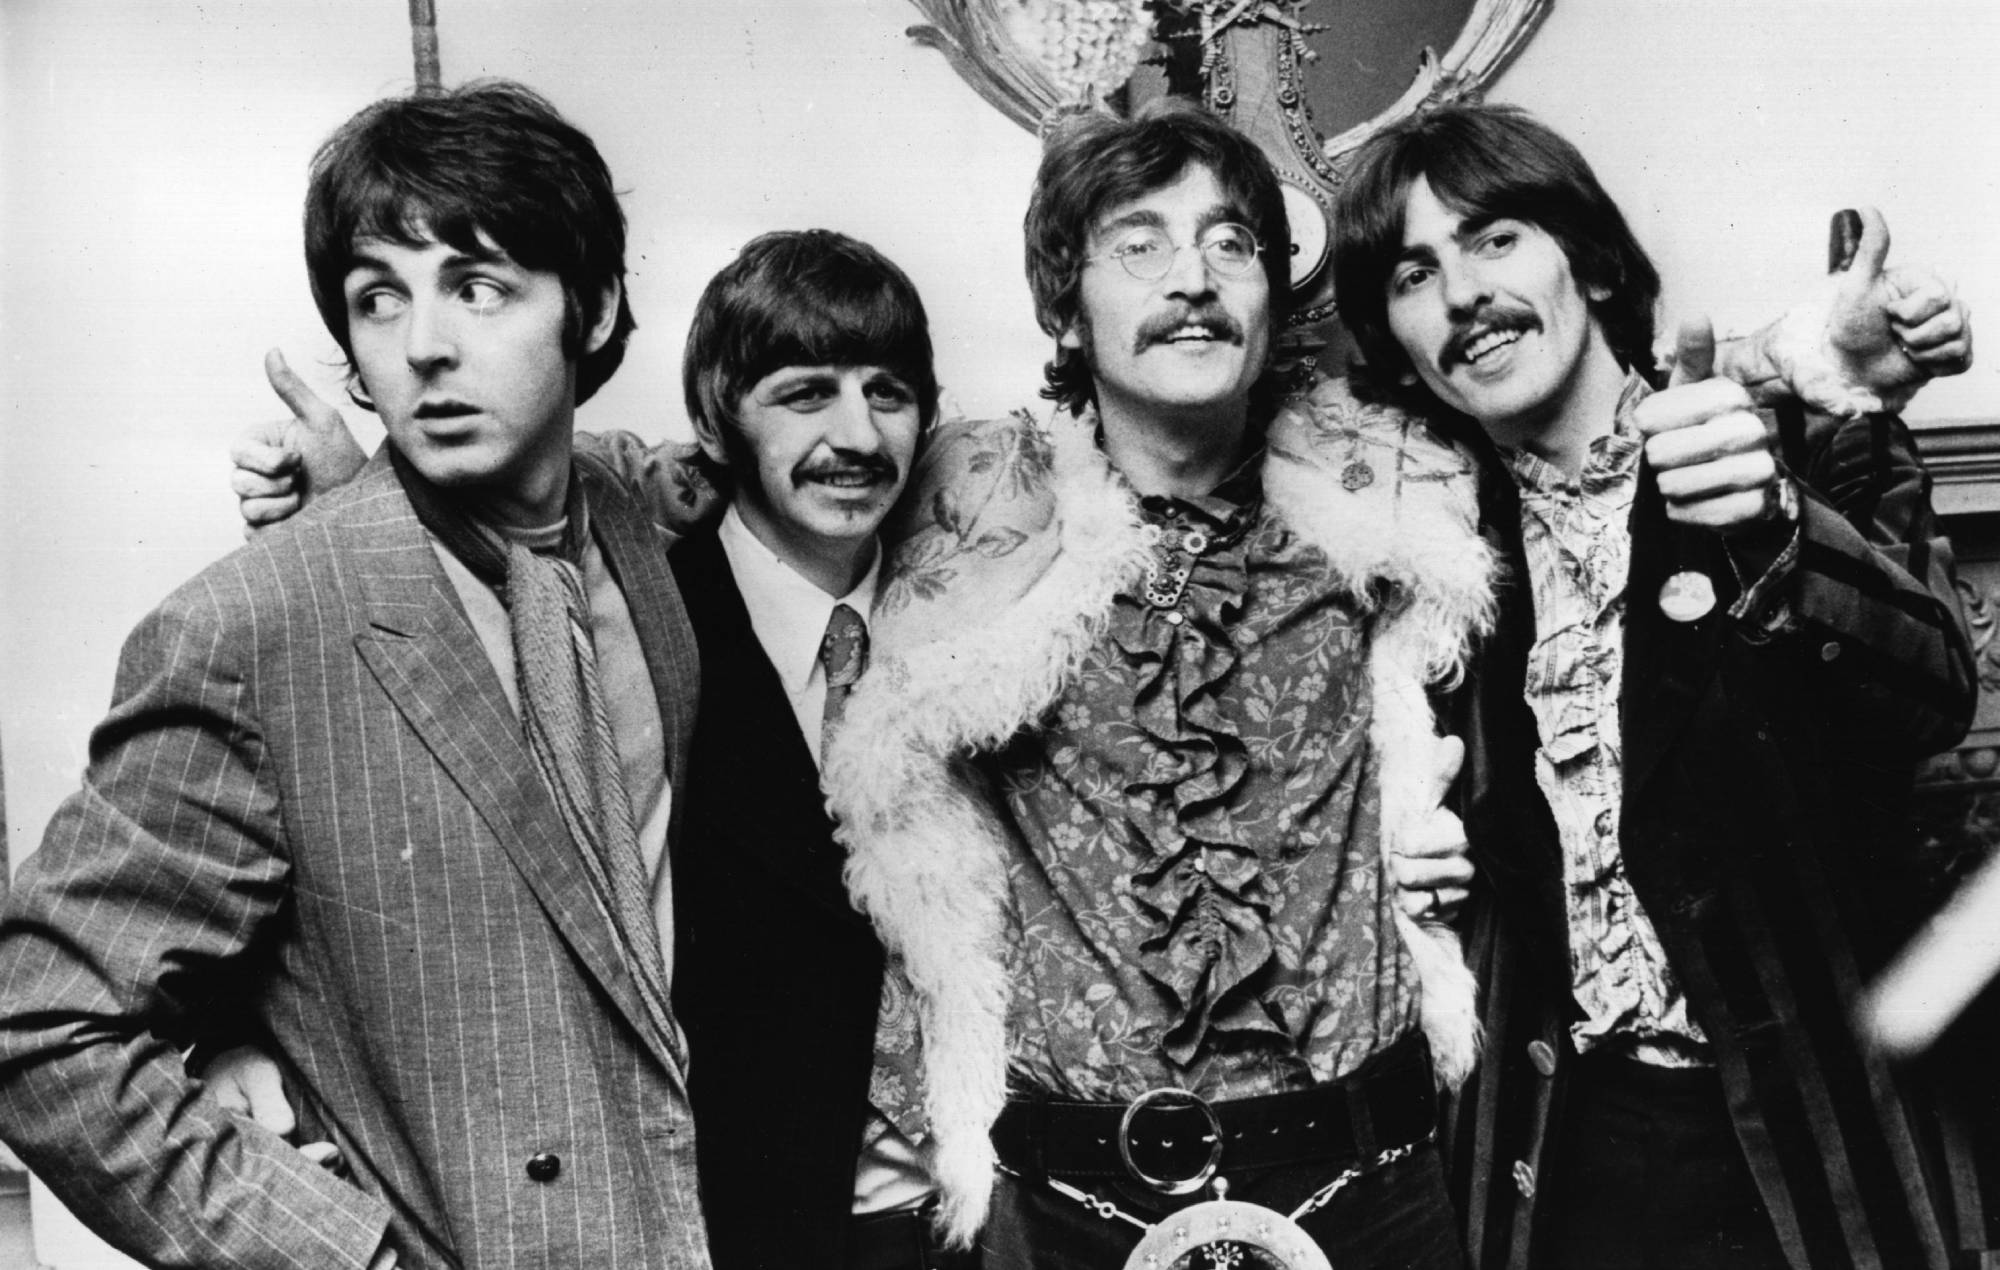 The Beatles celebrate the completion of their new album, 'Sgt Pepper's Lonely Hearts Club Band', at a press conference held at the west London home of their manager Brian Epstein. The LP is released on June 1st. (Photo by John Pratt/Keystone/Getty Images)